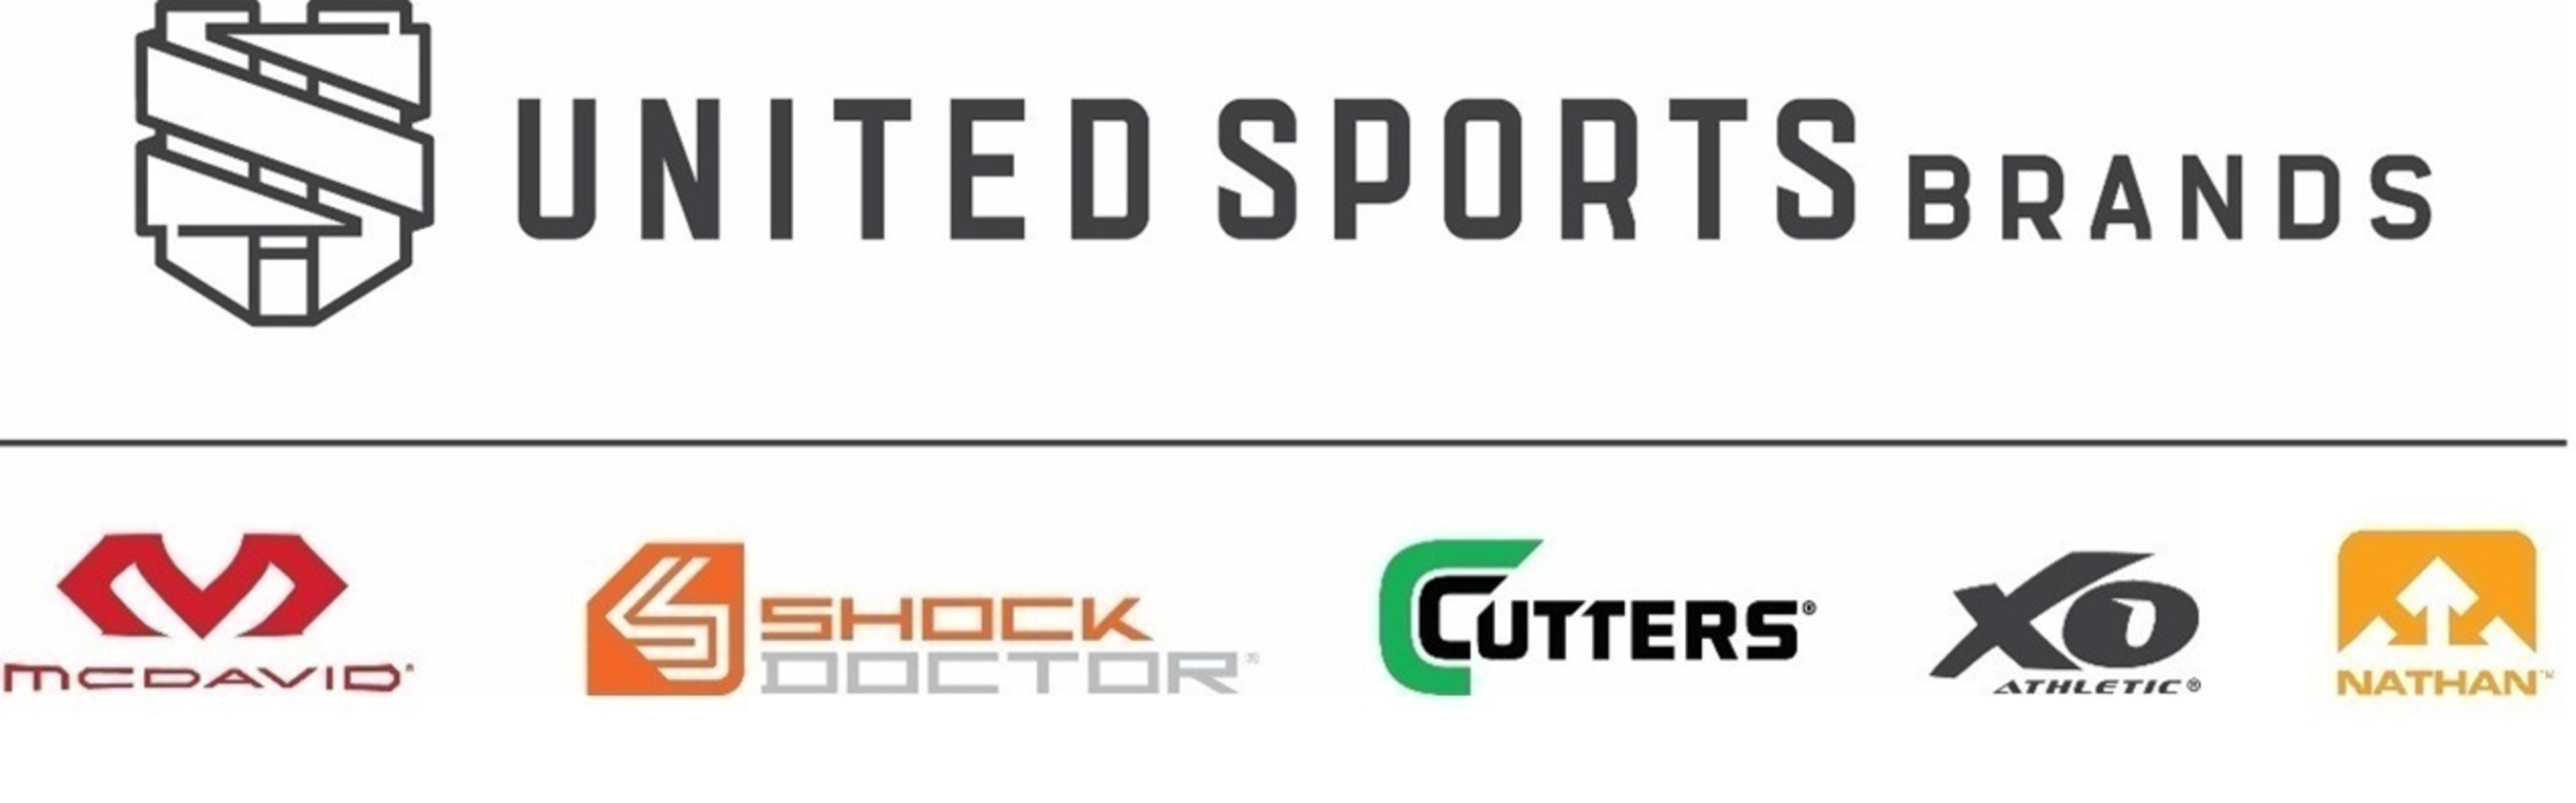 United Sports Brands is a global leader in sports performance and protective products designed to help athletes perform at their personal best.